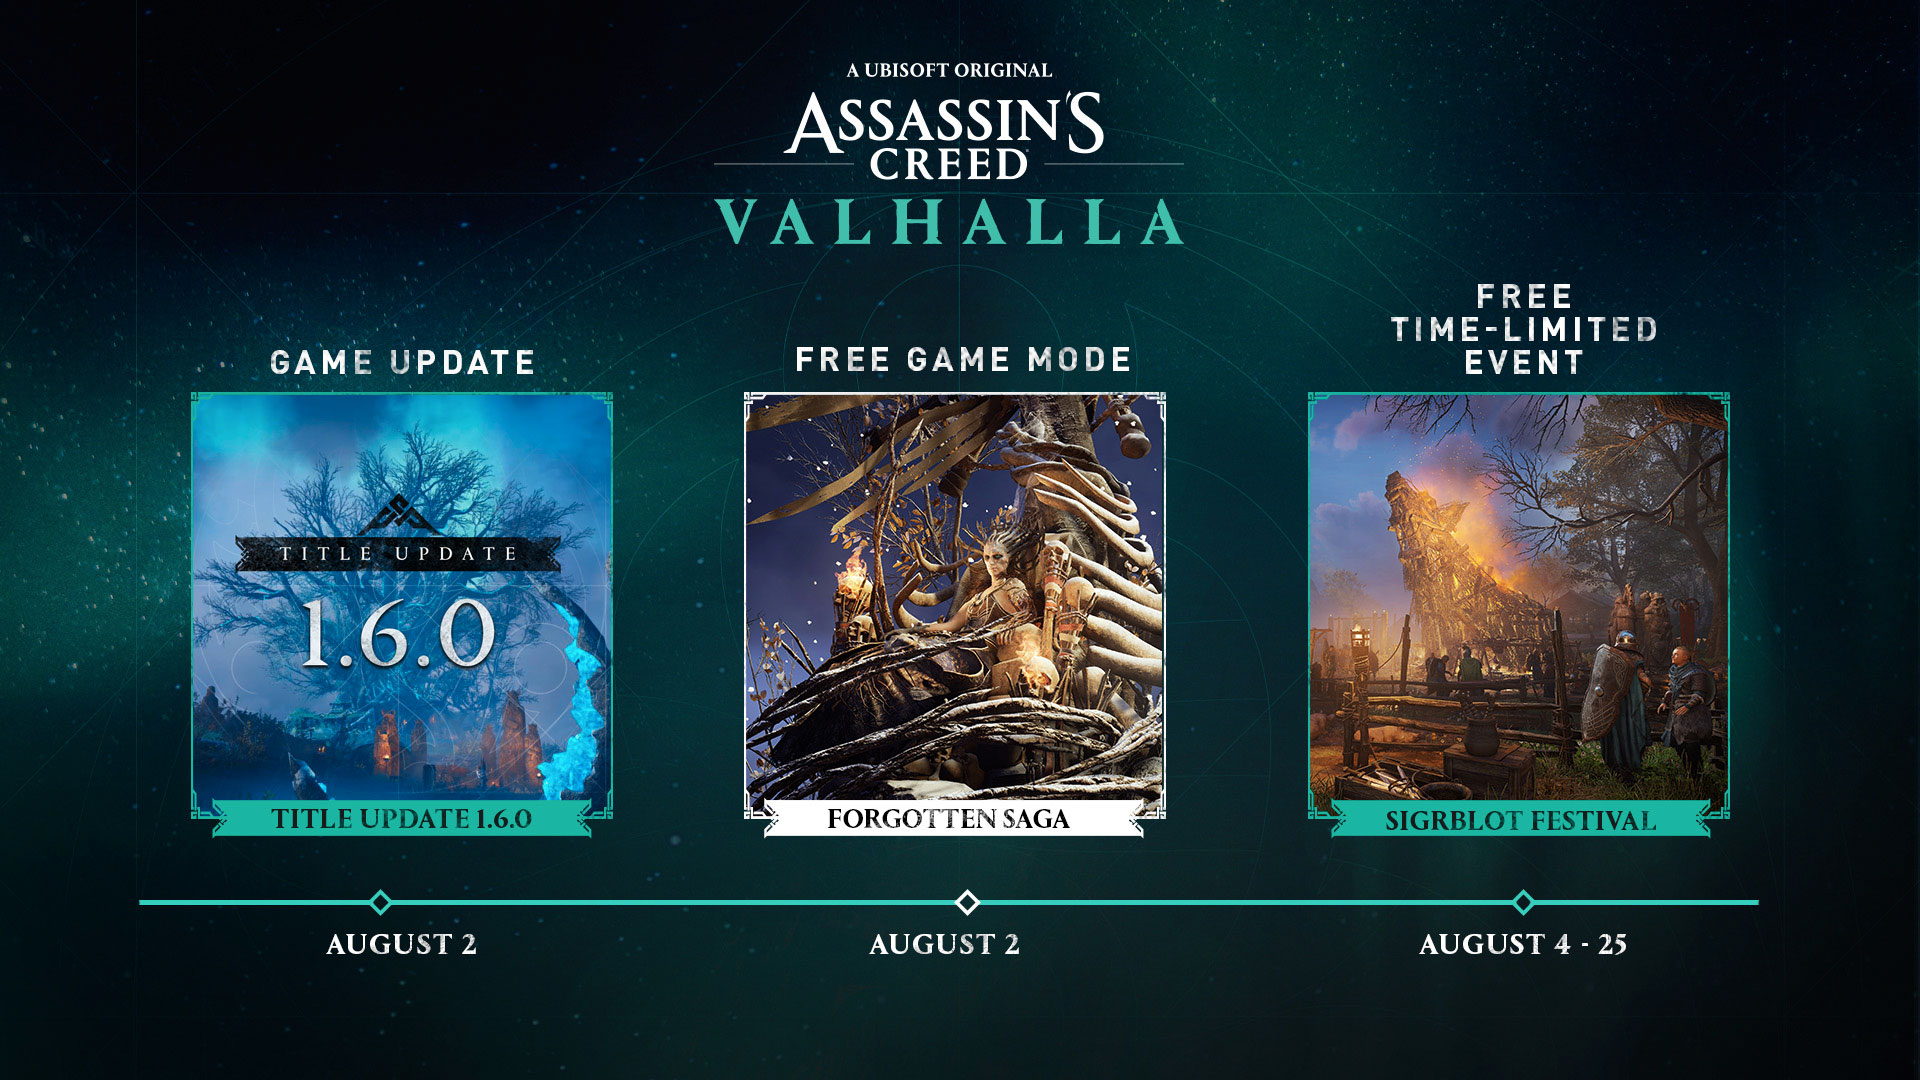 ironi Perpetual Optø, optø, frost tø AC Valhalla has new free DLC coming Tuesday. I don't care. - GGN